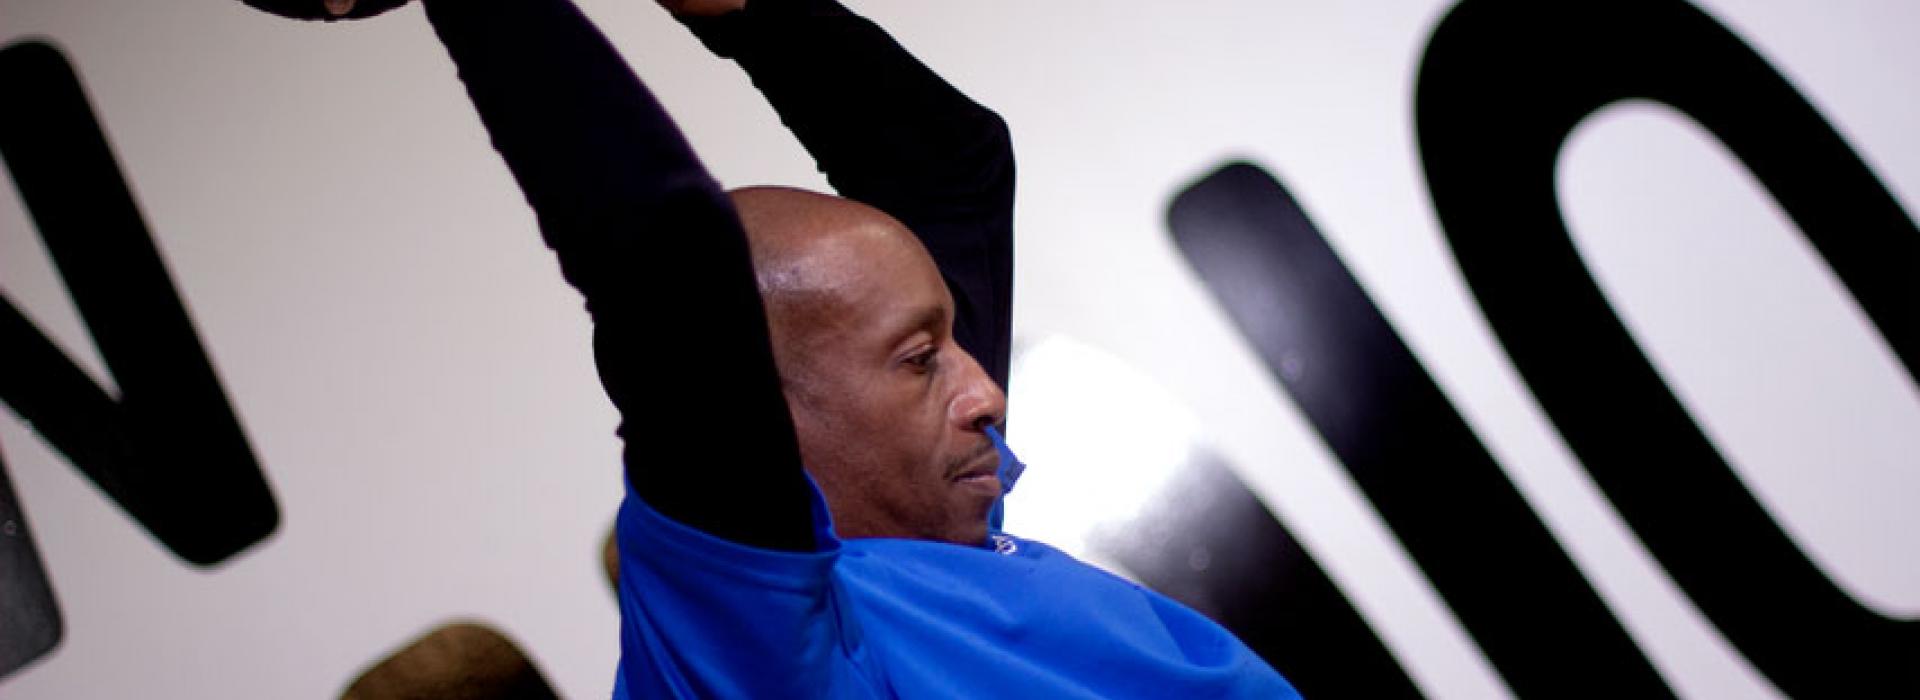 Personal Trainer Kareem Lainer demonstrates a workout at the Kennett Area YMCA